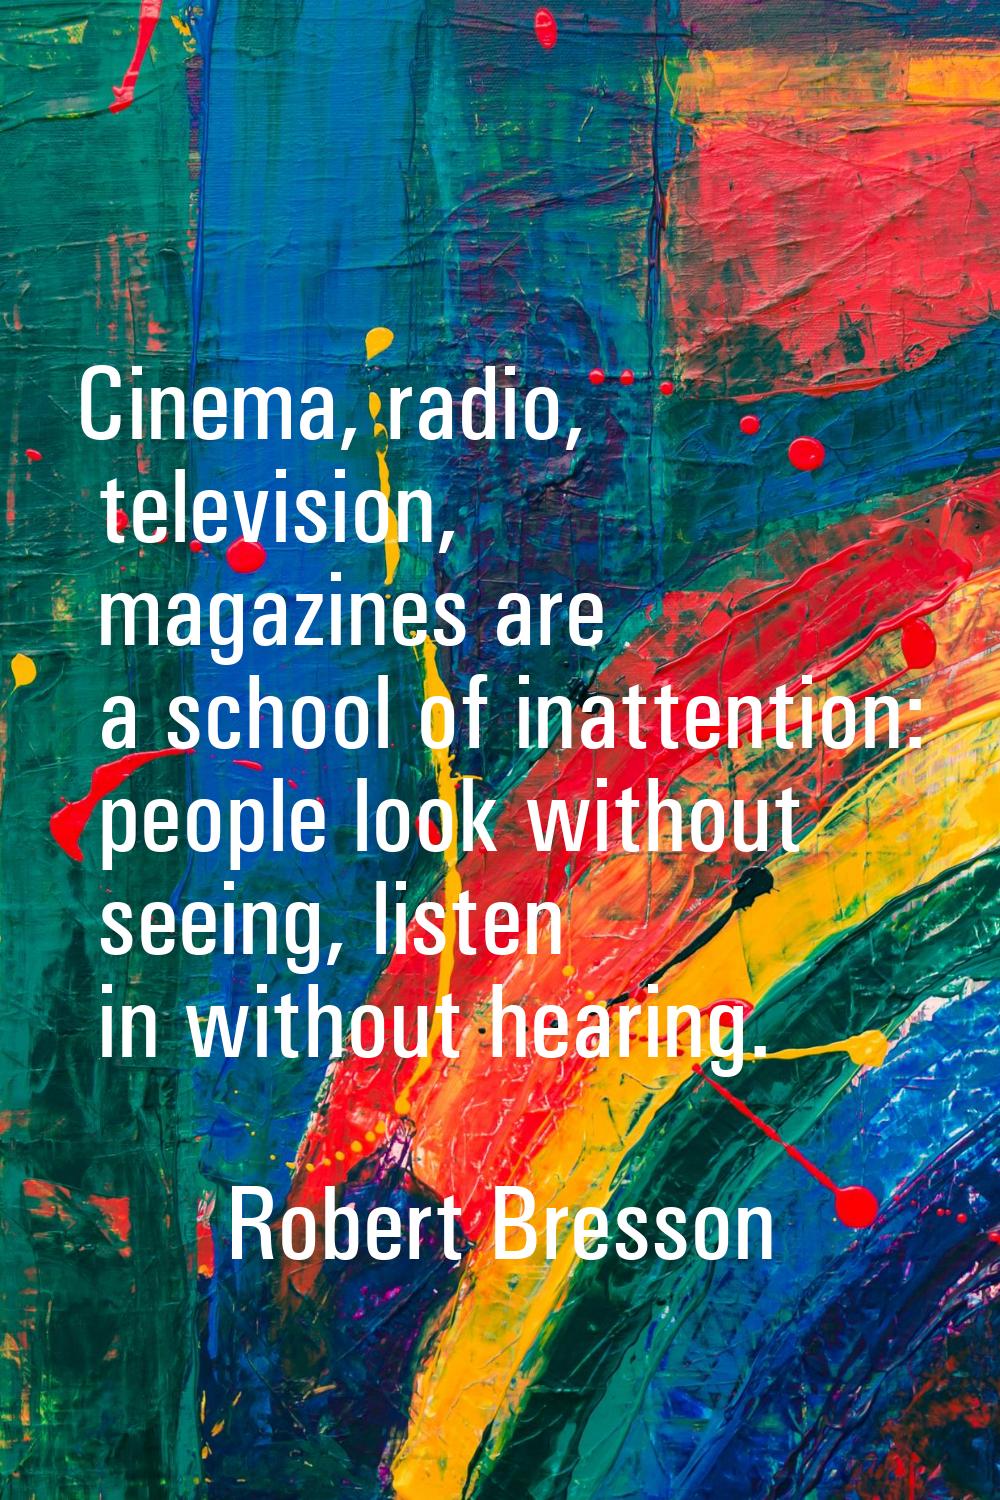 Cinema, radio, television, magazines are a school of inattention: people look without seeing, liste